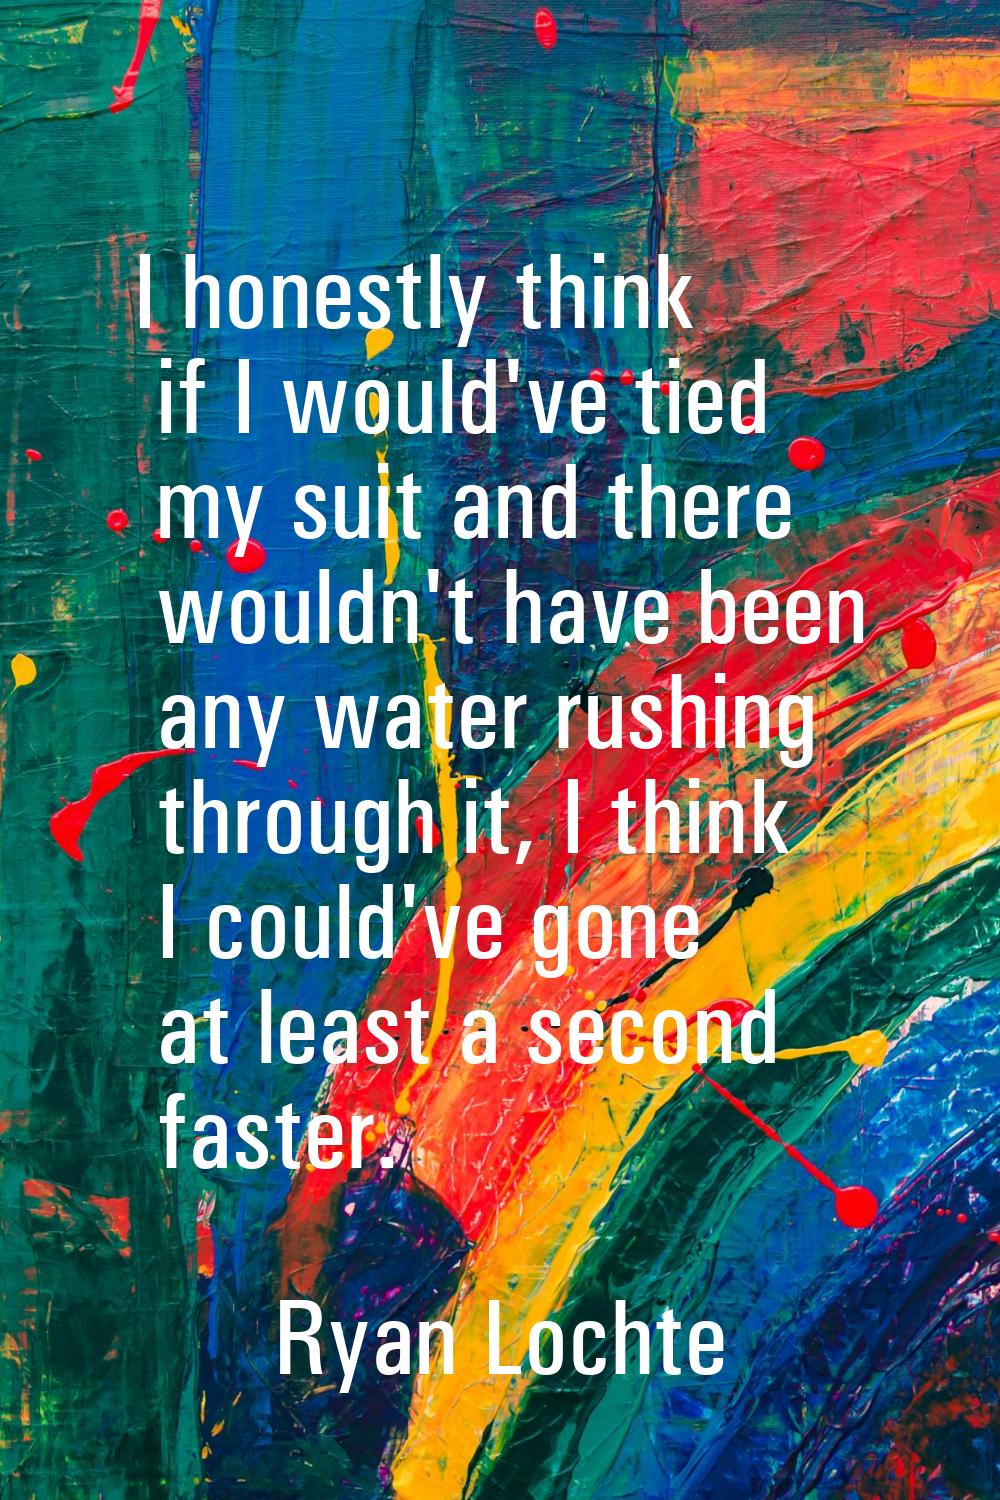 I honestly think if I would've tied my suit and there wouldn't have been any water rushing through 